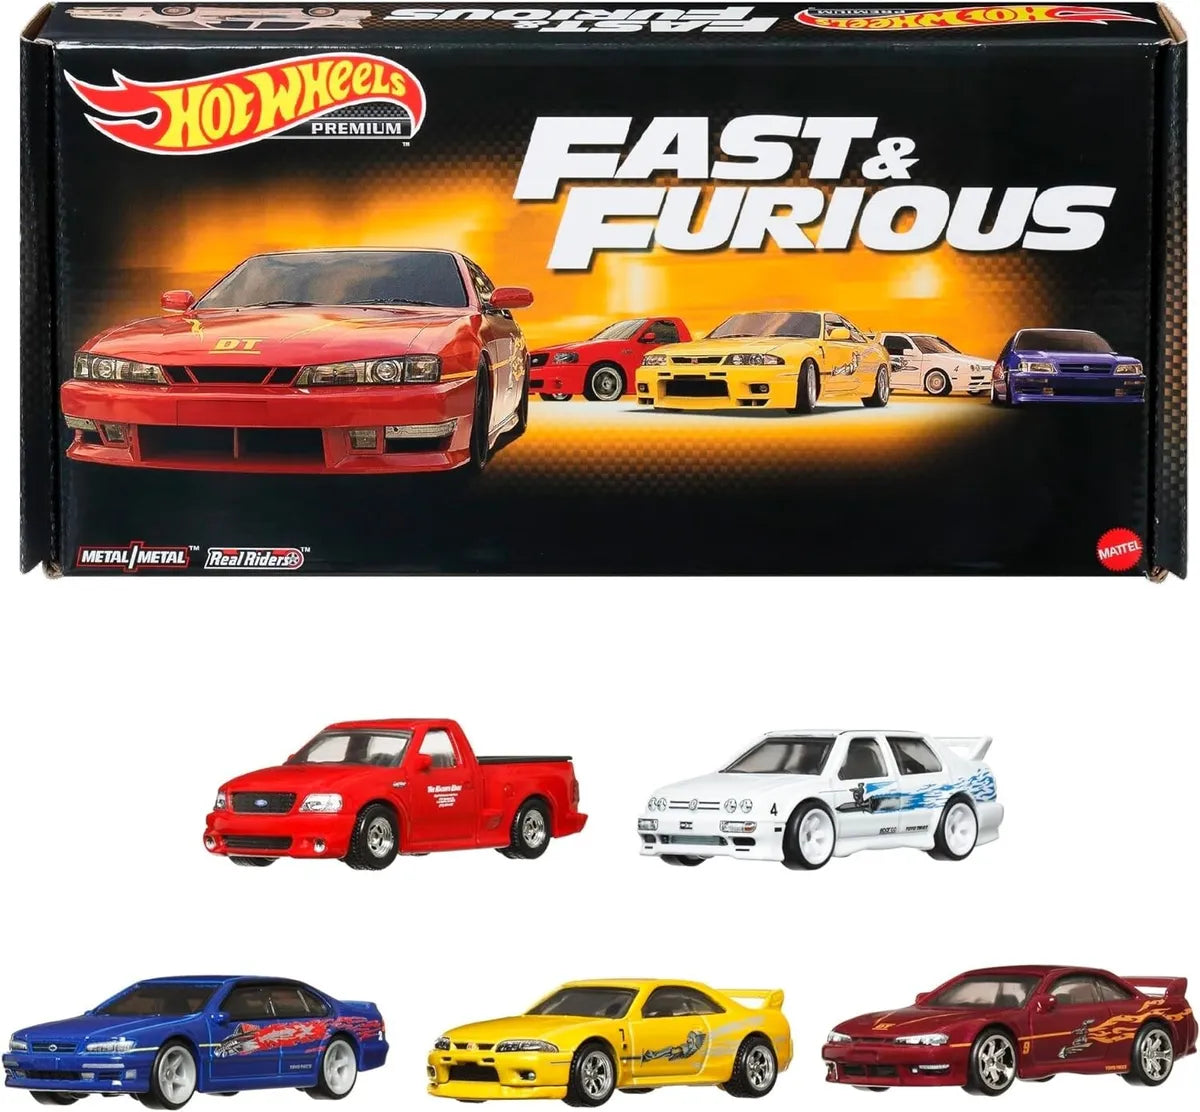 Hot Wheels Amazon Exclusive The Fast & The Furious Premium 5 Pack Set